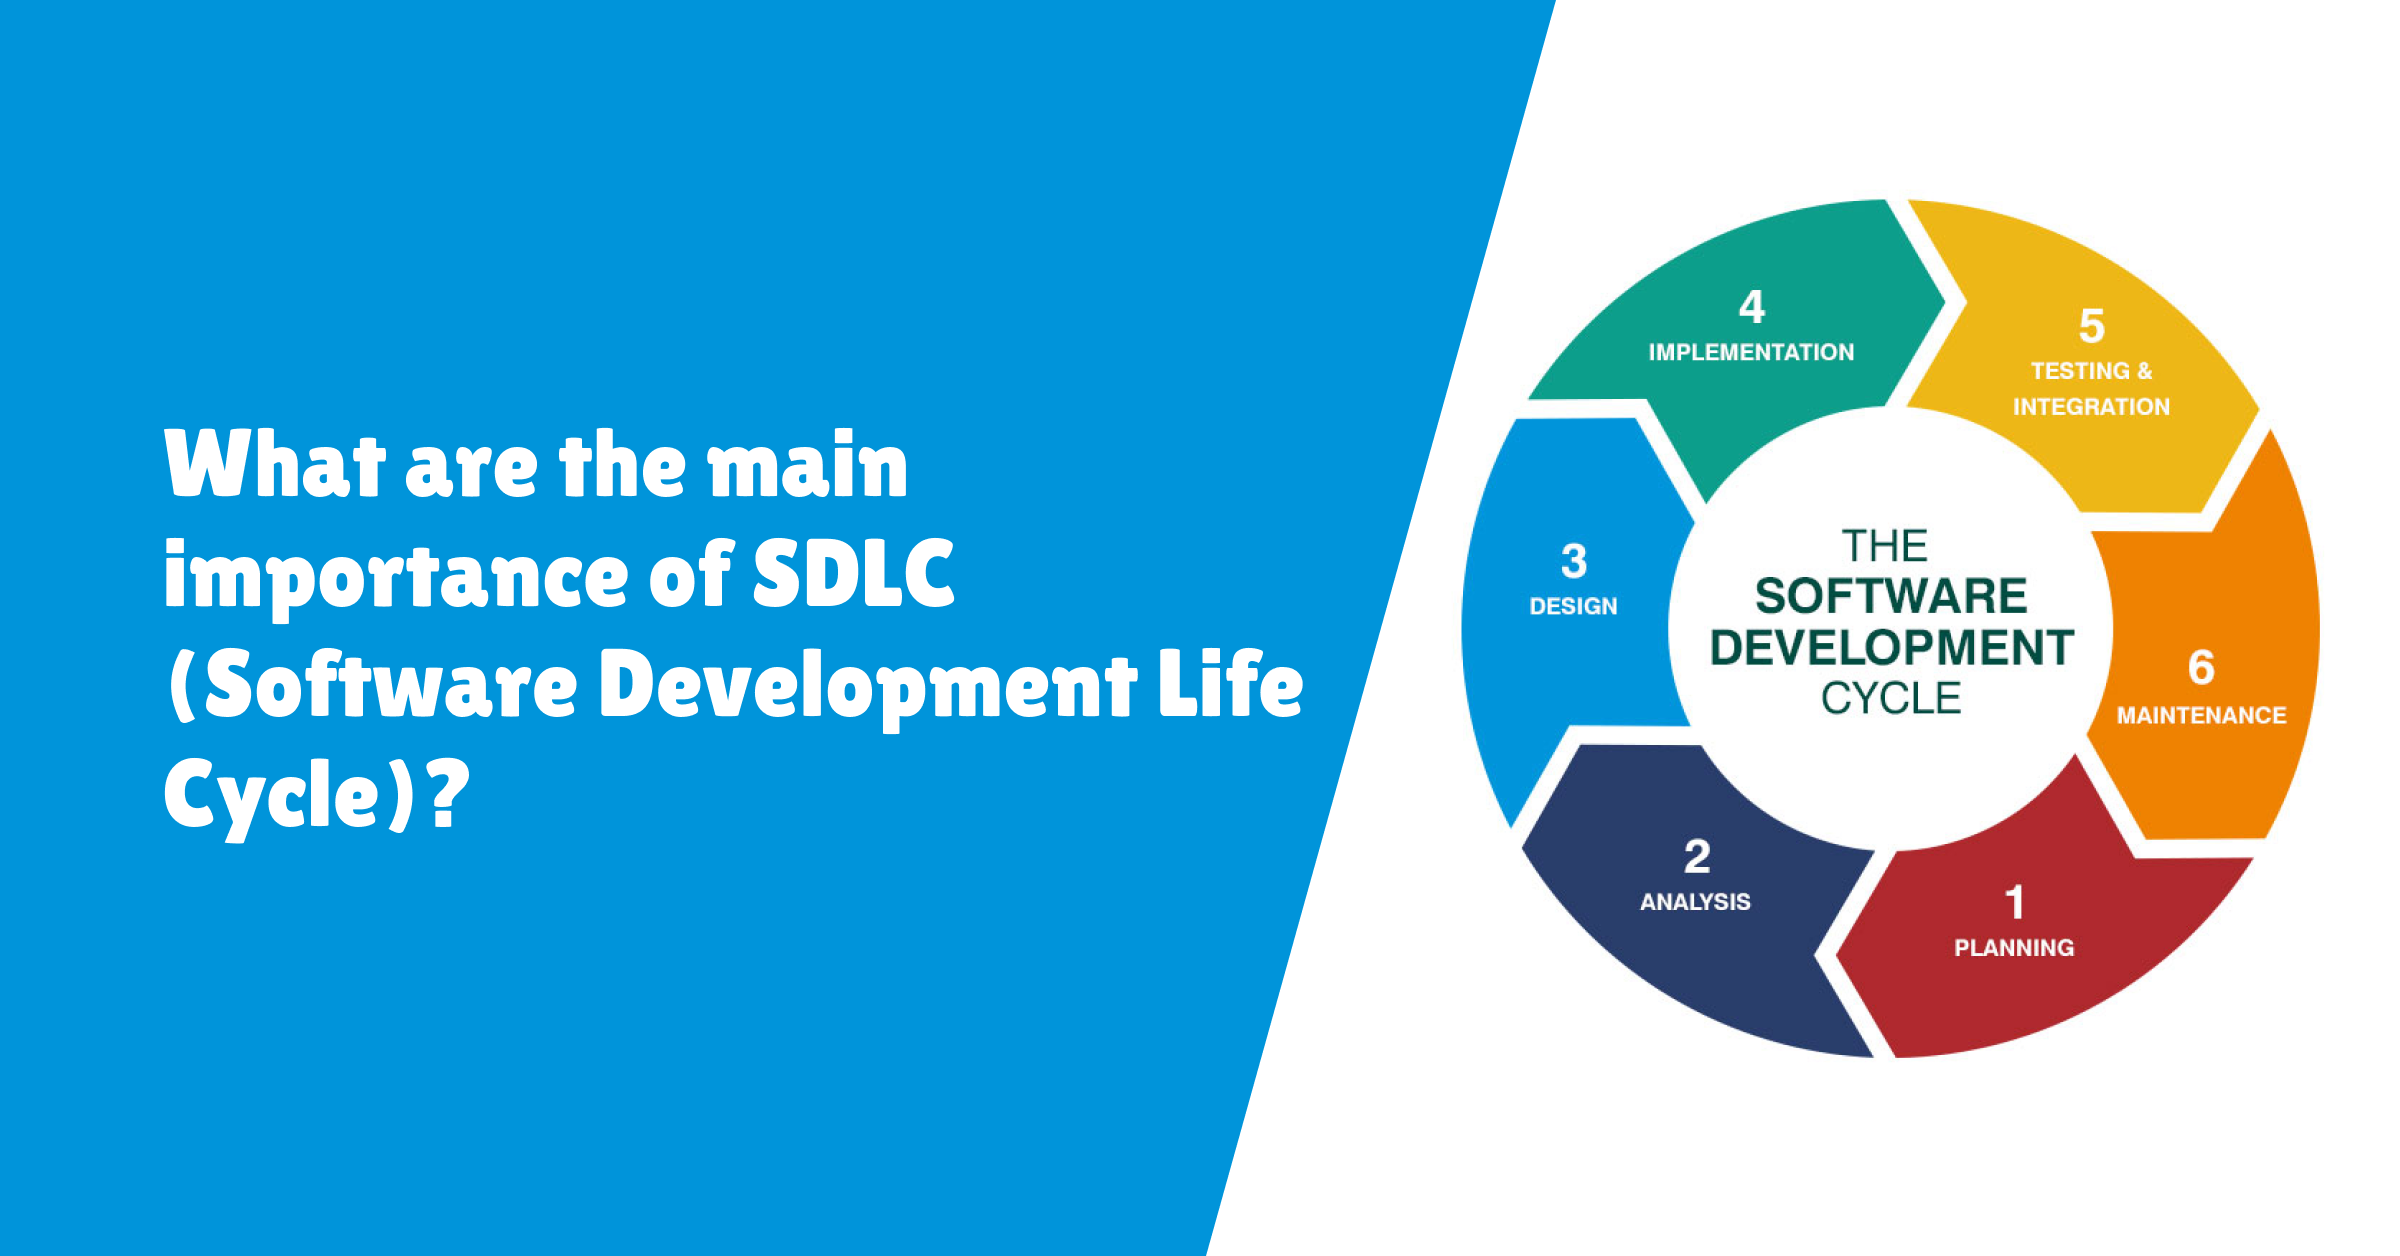 What is the main importance of SDLC( Software Development Life Cycle)